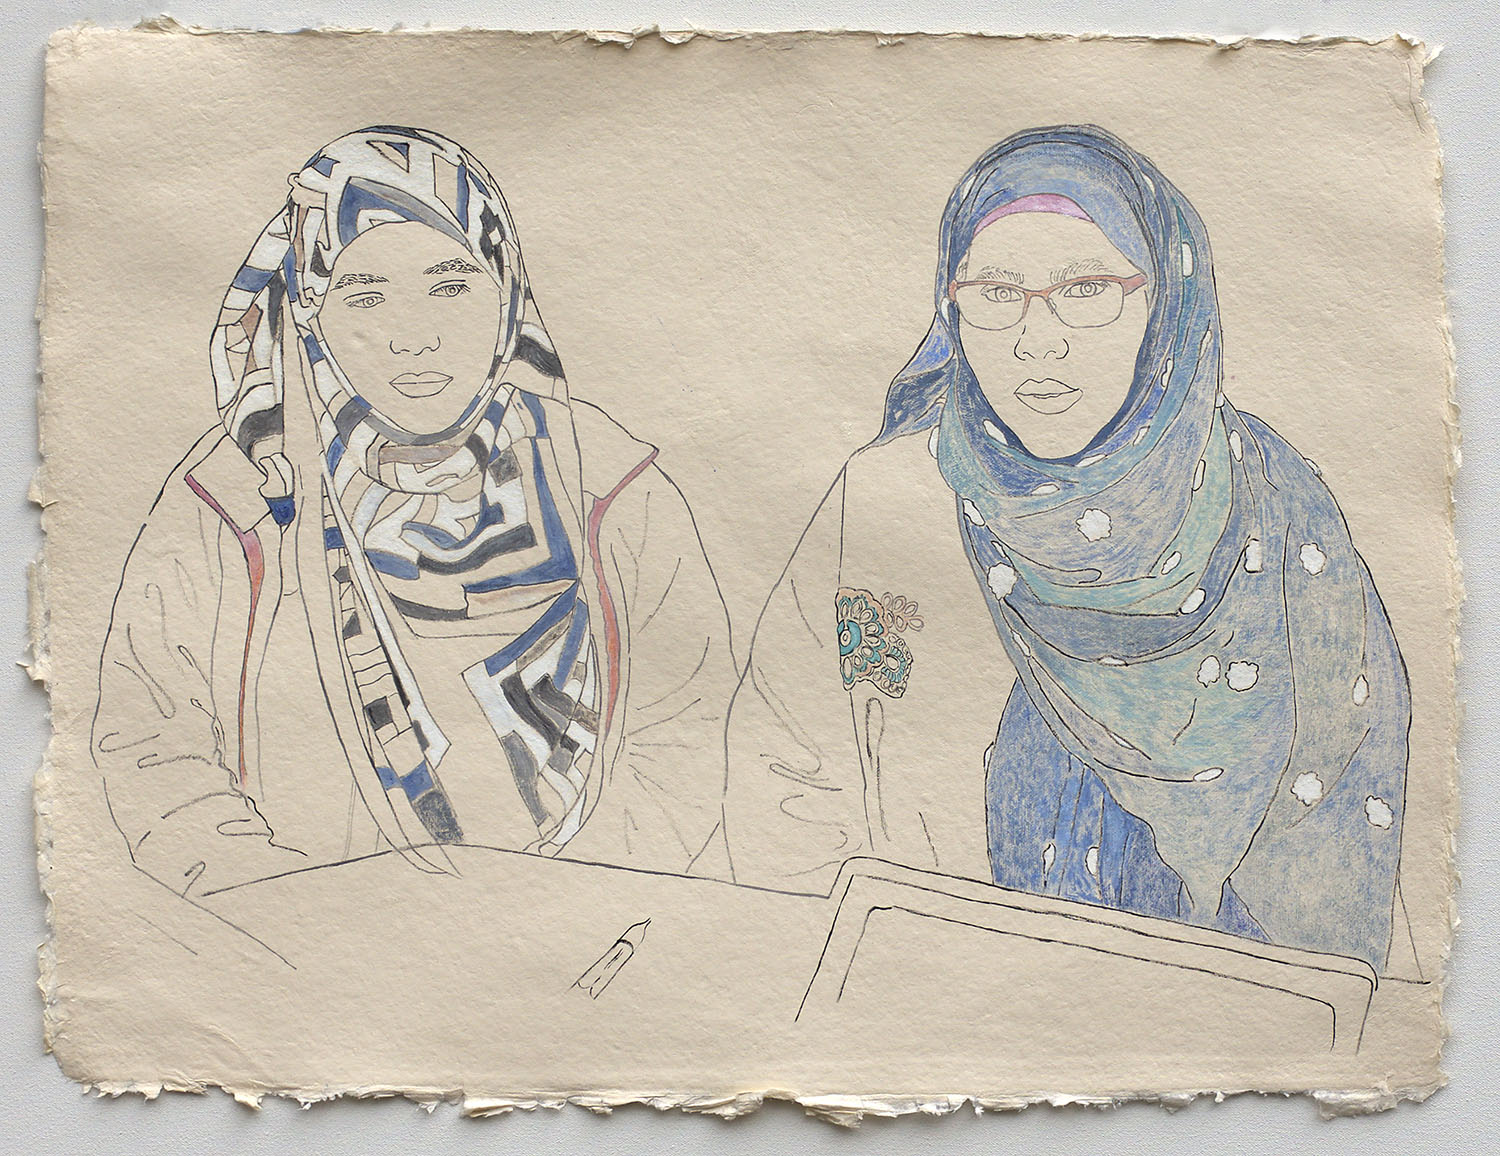   Mother and Daughter, Applying for United States Citizenship   2019, ink, watercolor, gouache on handmade paper made in India from recycled clothing, 19” x 25”  In the collection of Sage Bionetworks, Seattle, WA. 